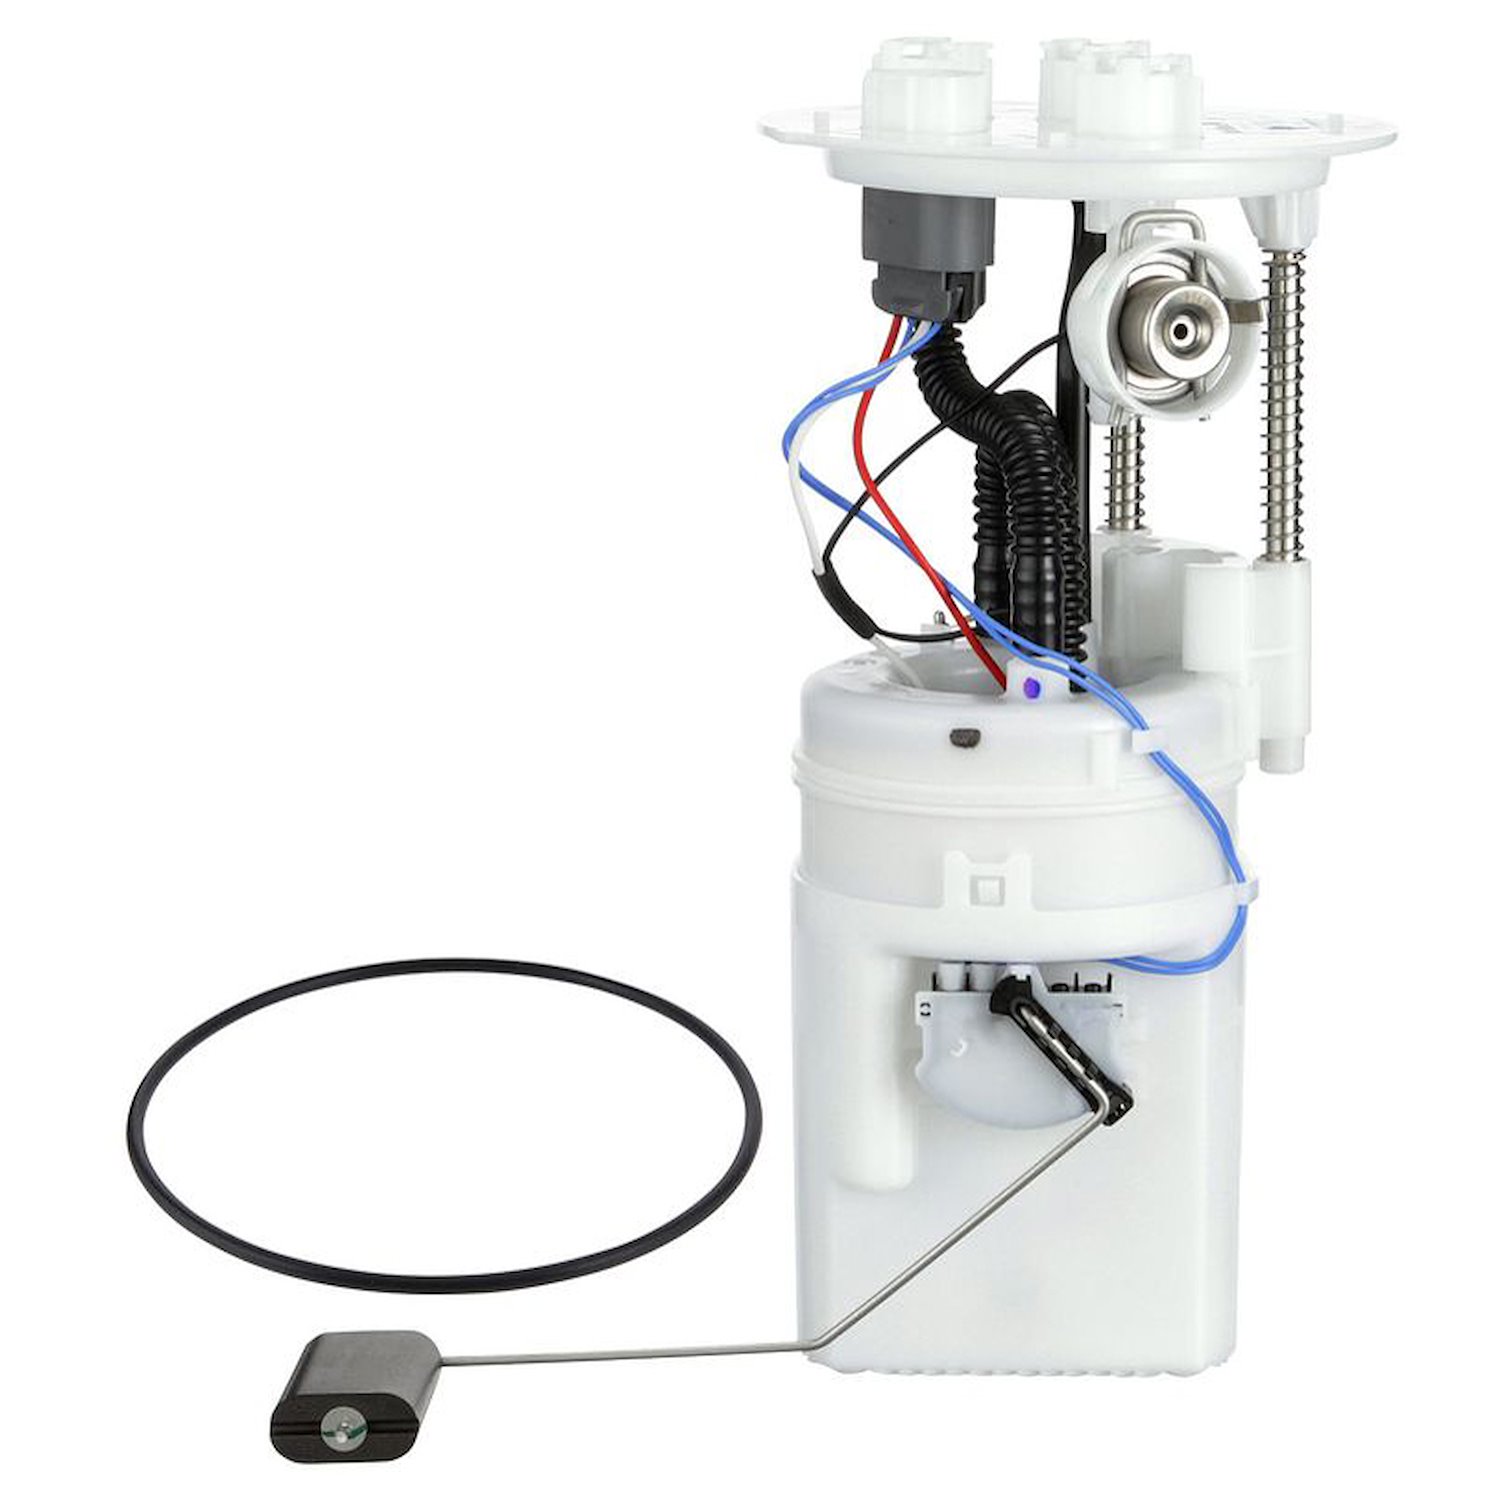 OE Replacement Fuel Pump Module Assembly for 2012-2016 Toyota Sequoia/Tundra